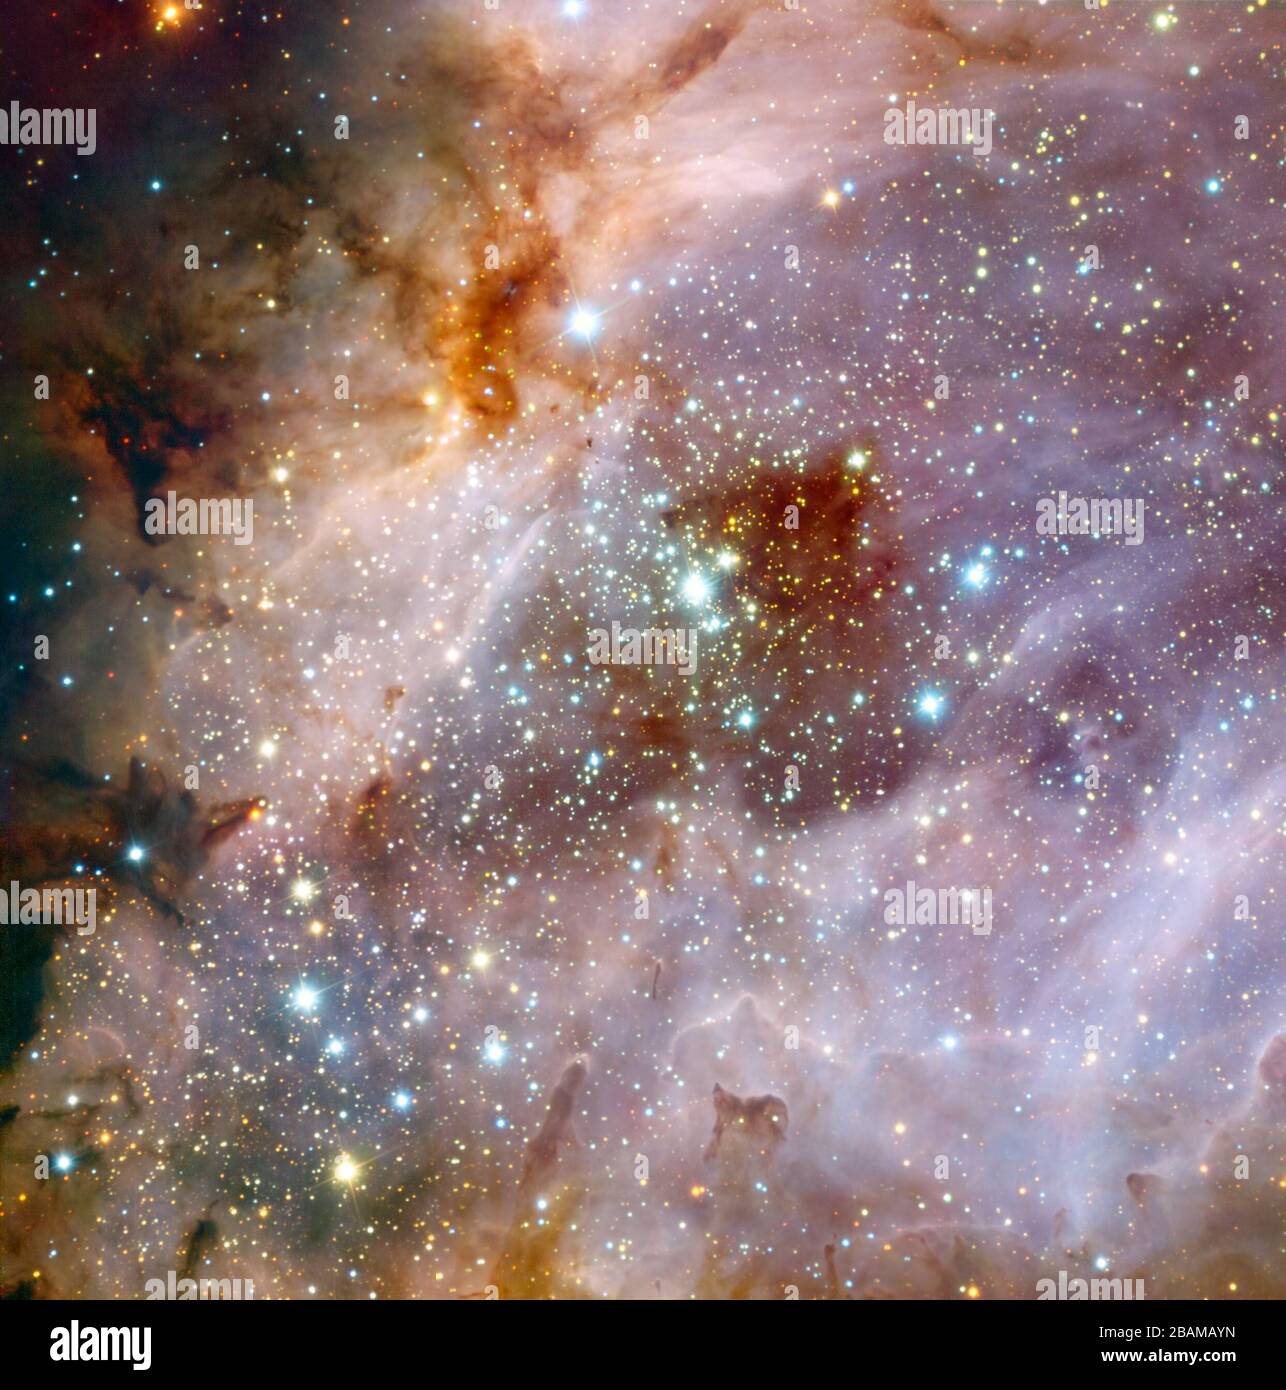 English: Astronomers using data from ESO's Very Large Telescope (VLT), at  the Paranal Observatory in Chile, have made an impressive composite of the  nebula Messier 17, also known as the Omega Nebula